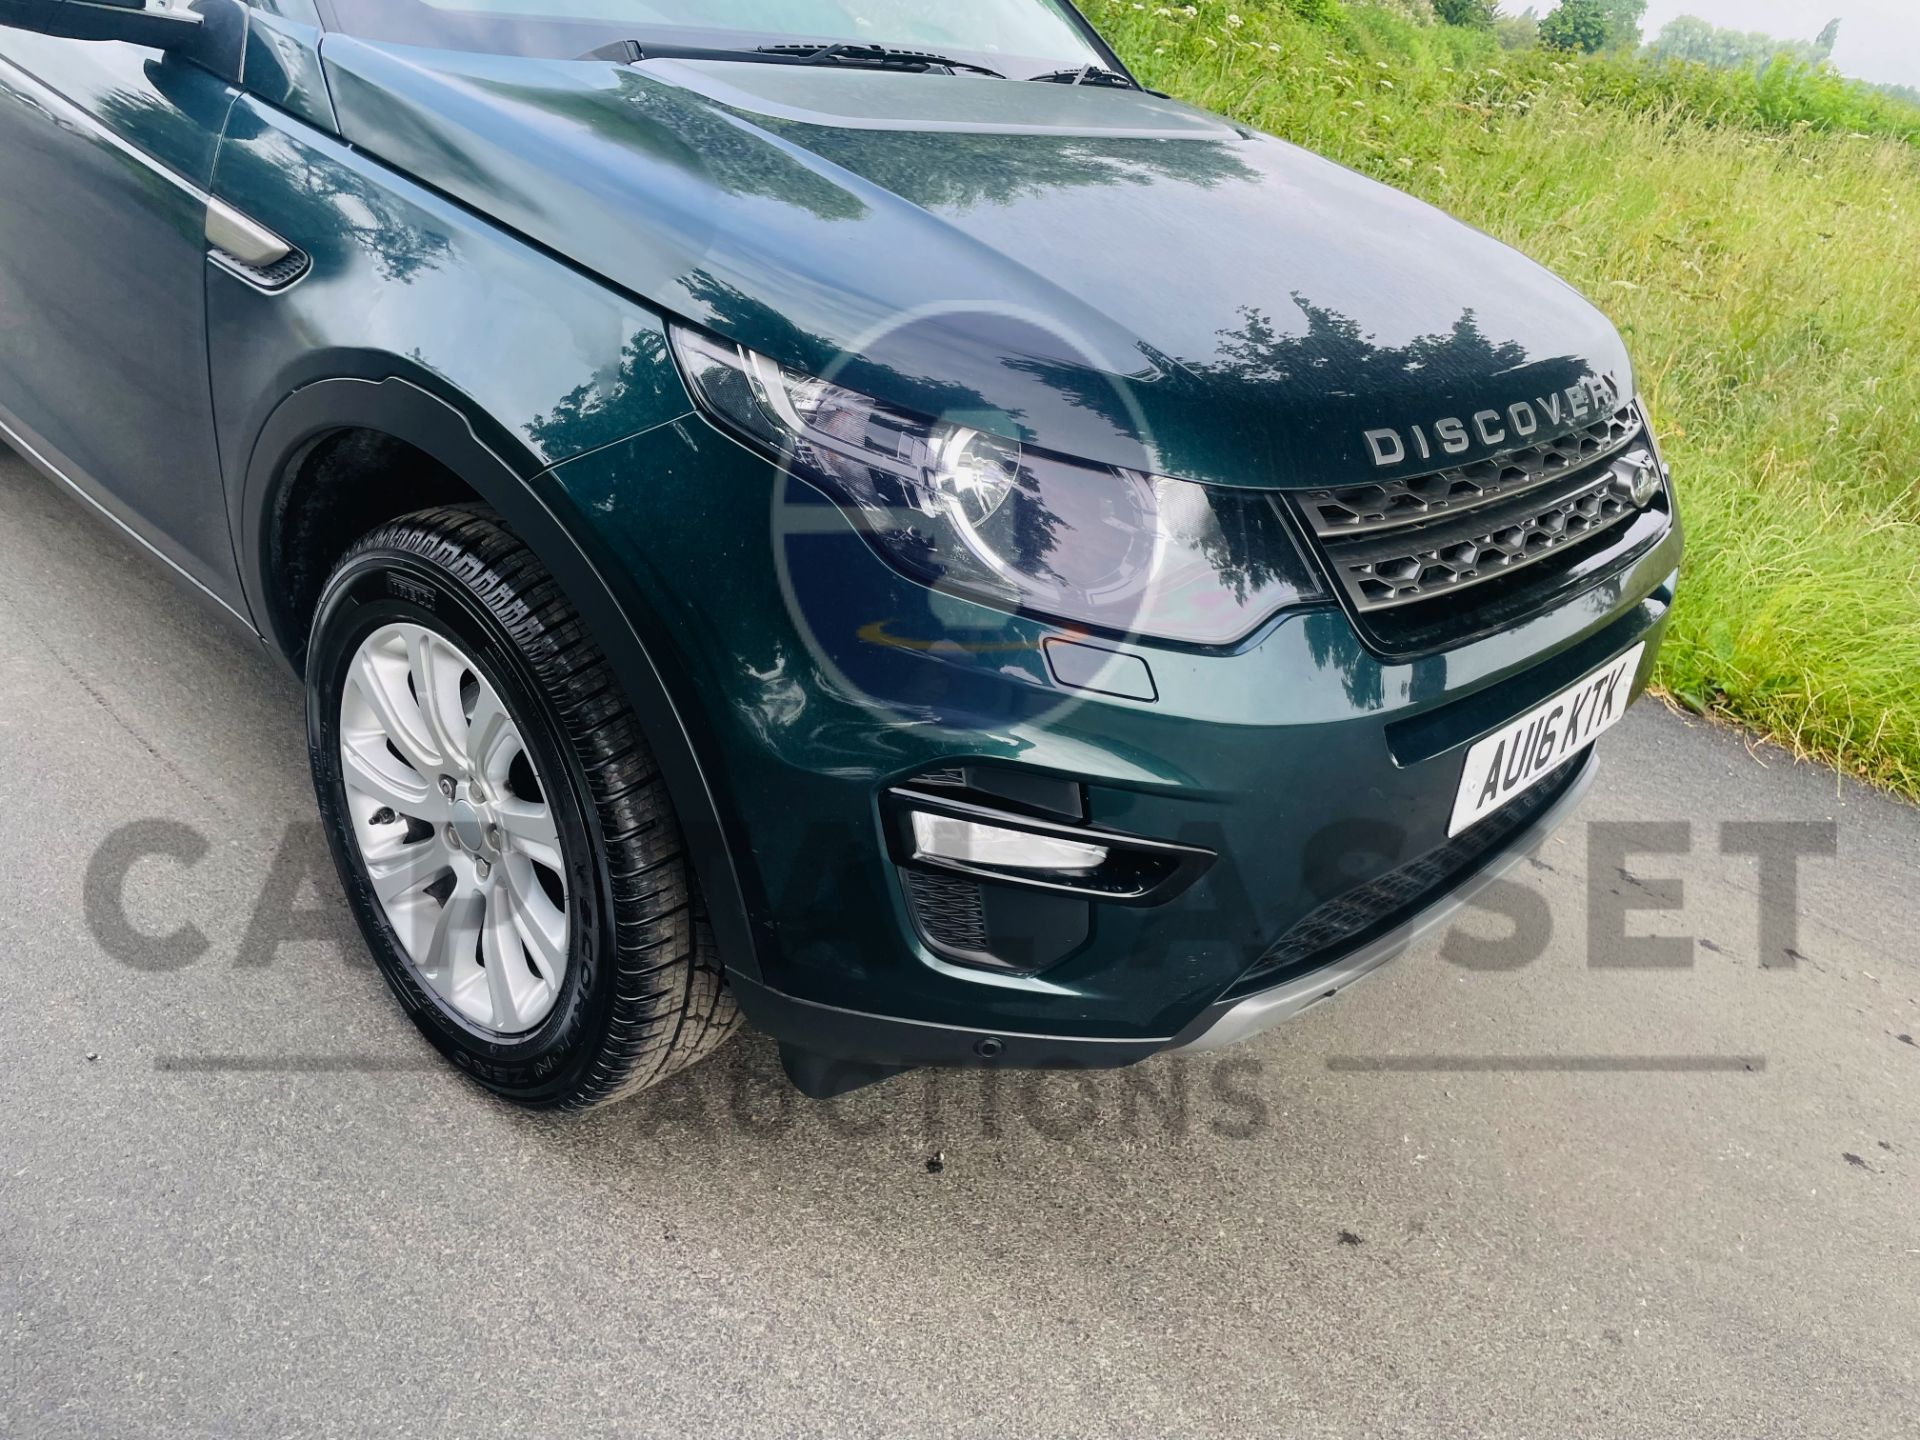 LAND ROVER DISCOVERY SPORT *SE TECH* 7 SEATER SUV (2016) 2.0 TD4 - AUTO *LEATHER & NAV* (NO VAT) - Image 15 of 54